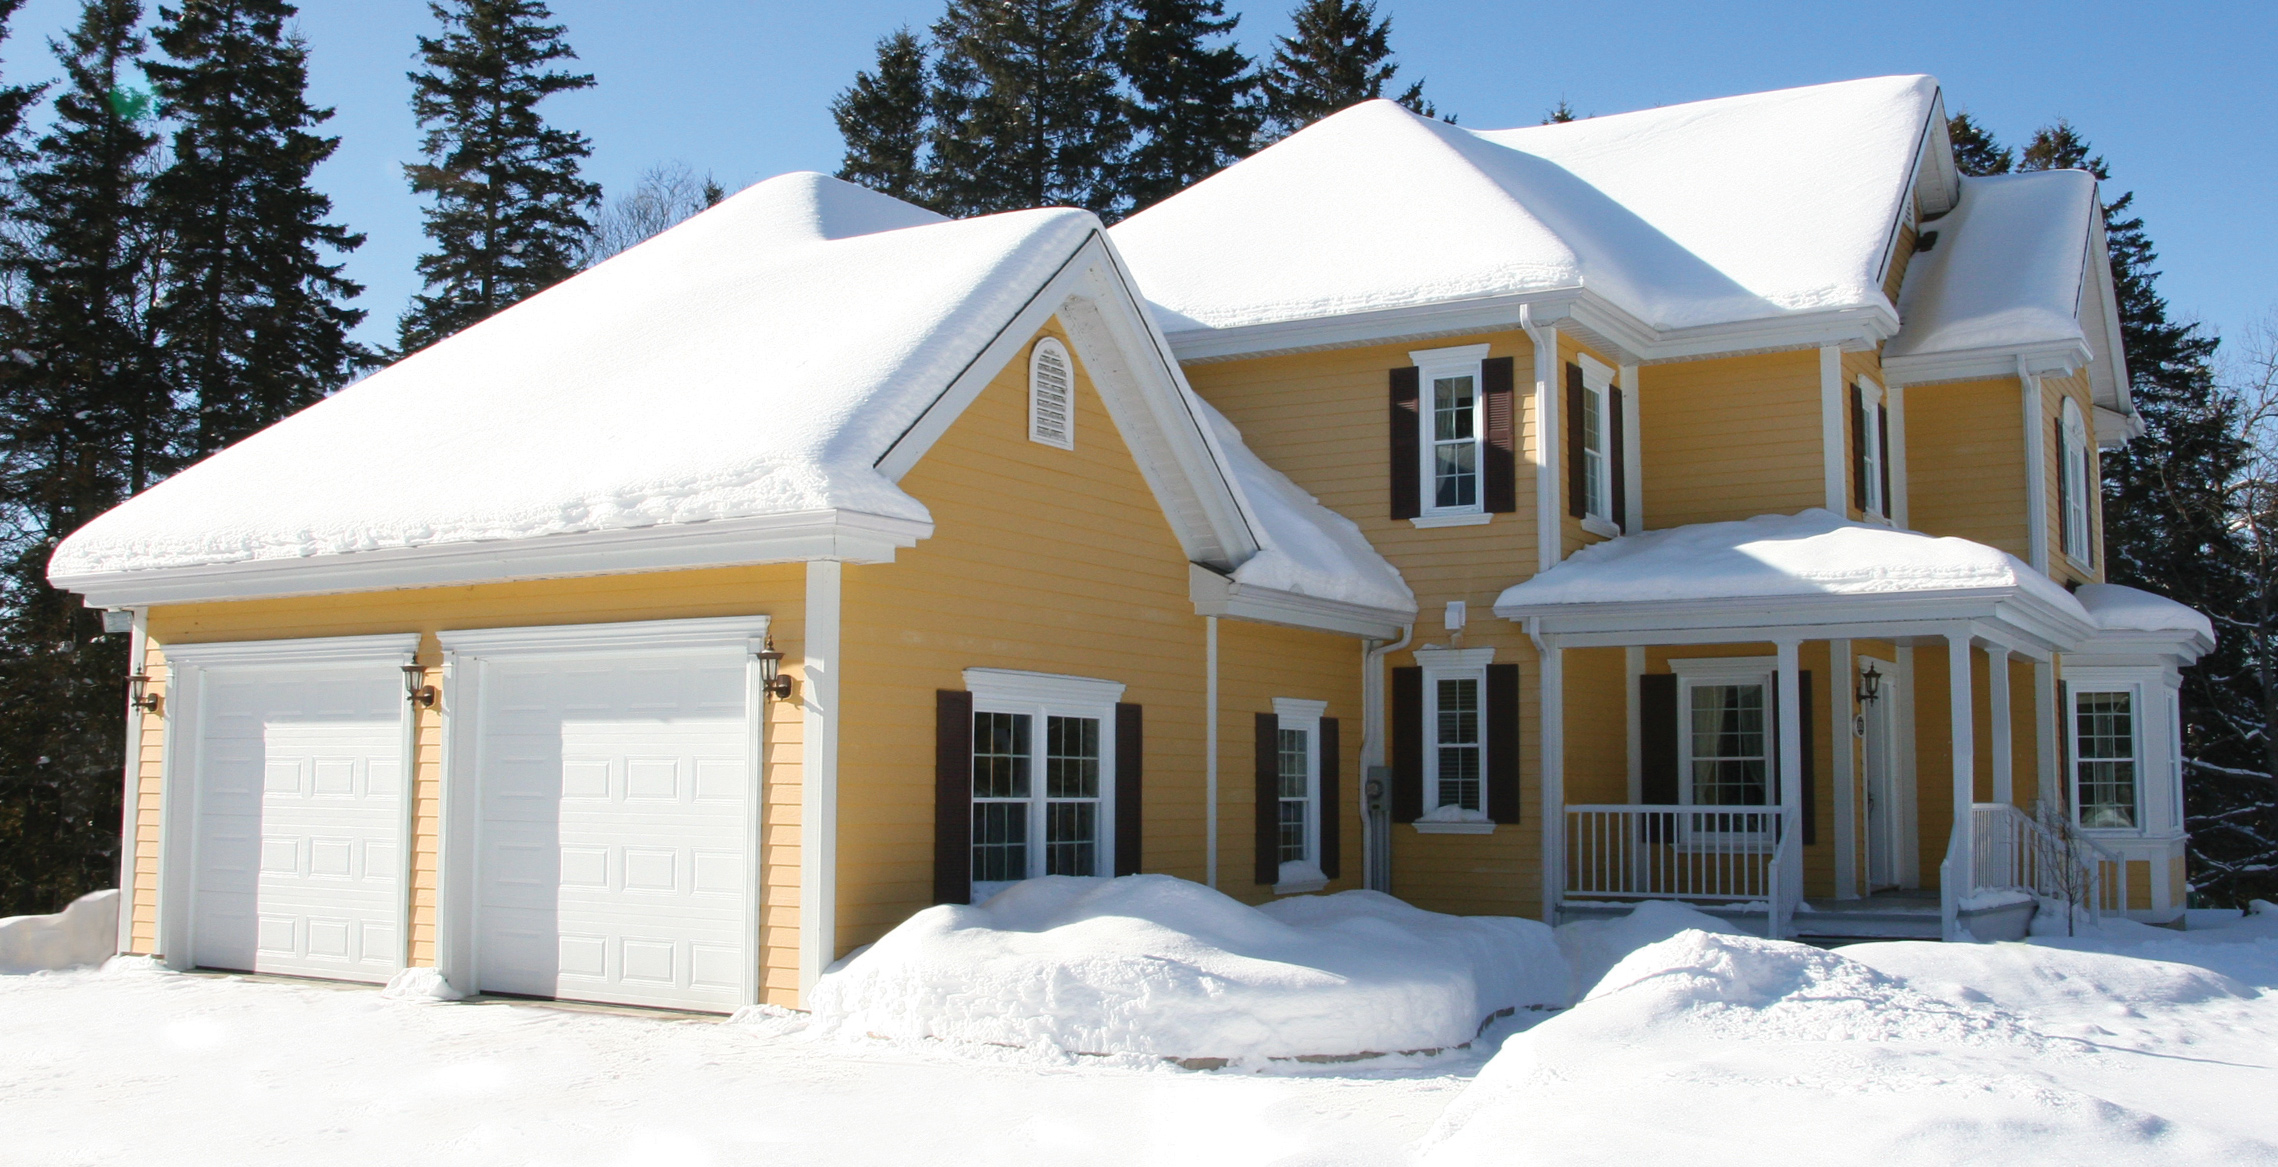 Traditional style yellow house in winter, with double garage having 9' x 7' Standard+ Classic CC Ice White garage doors.